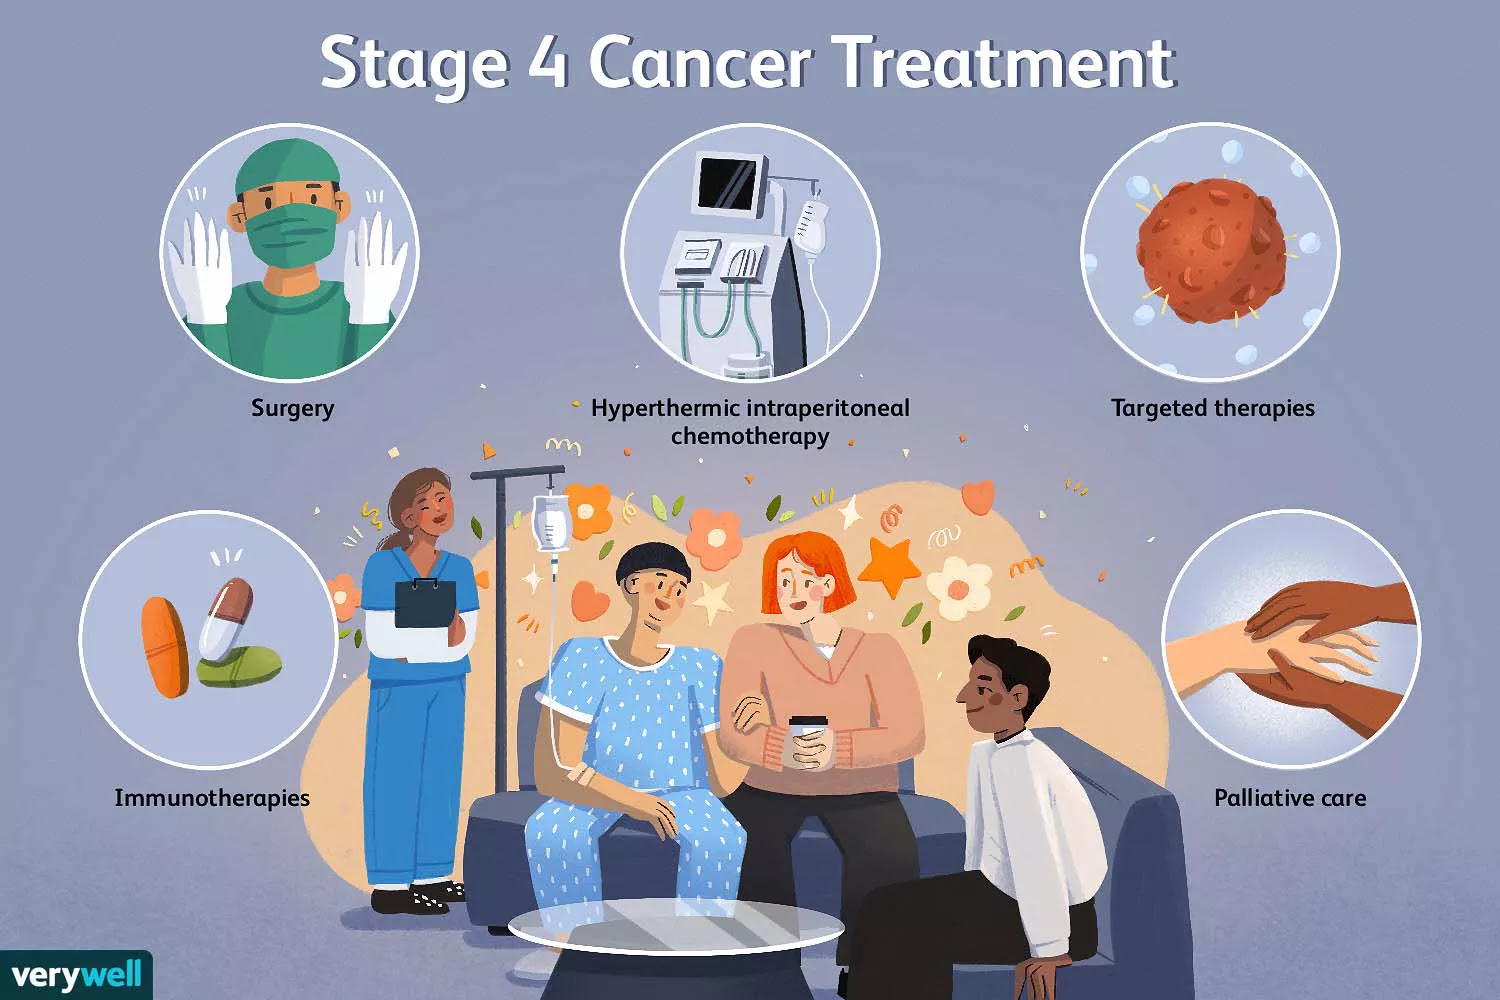 Stage 4 Cancer Treatment